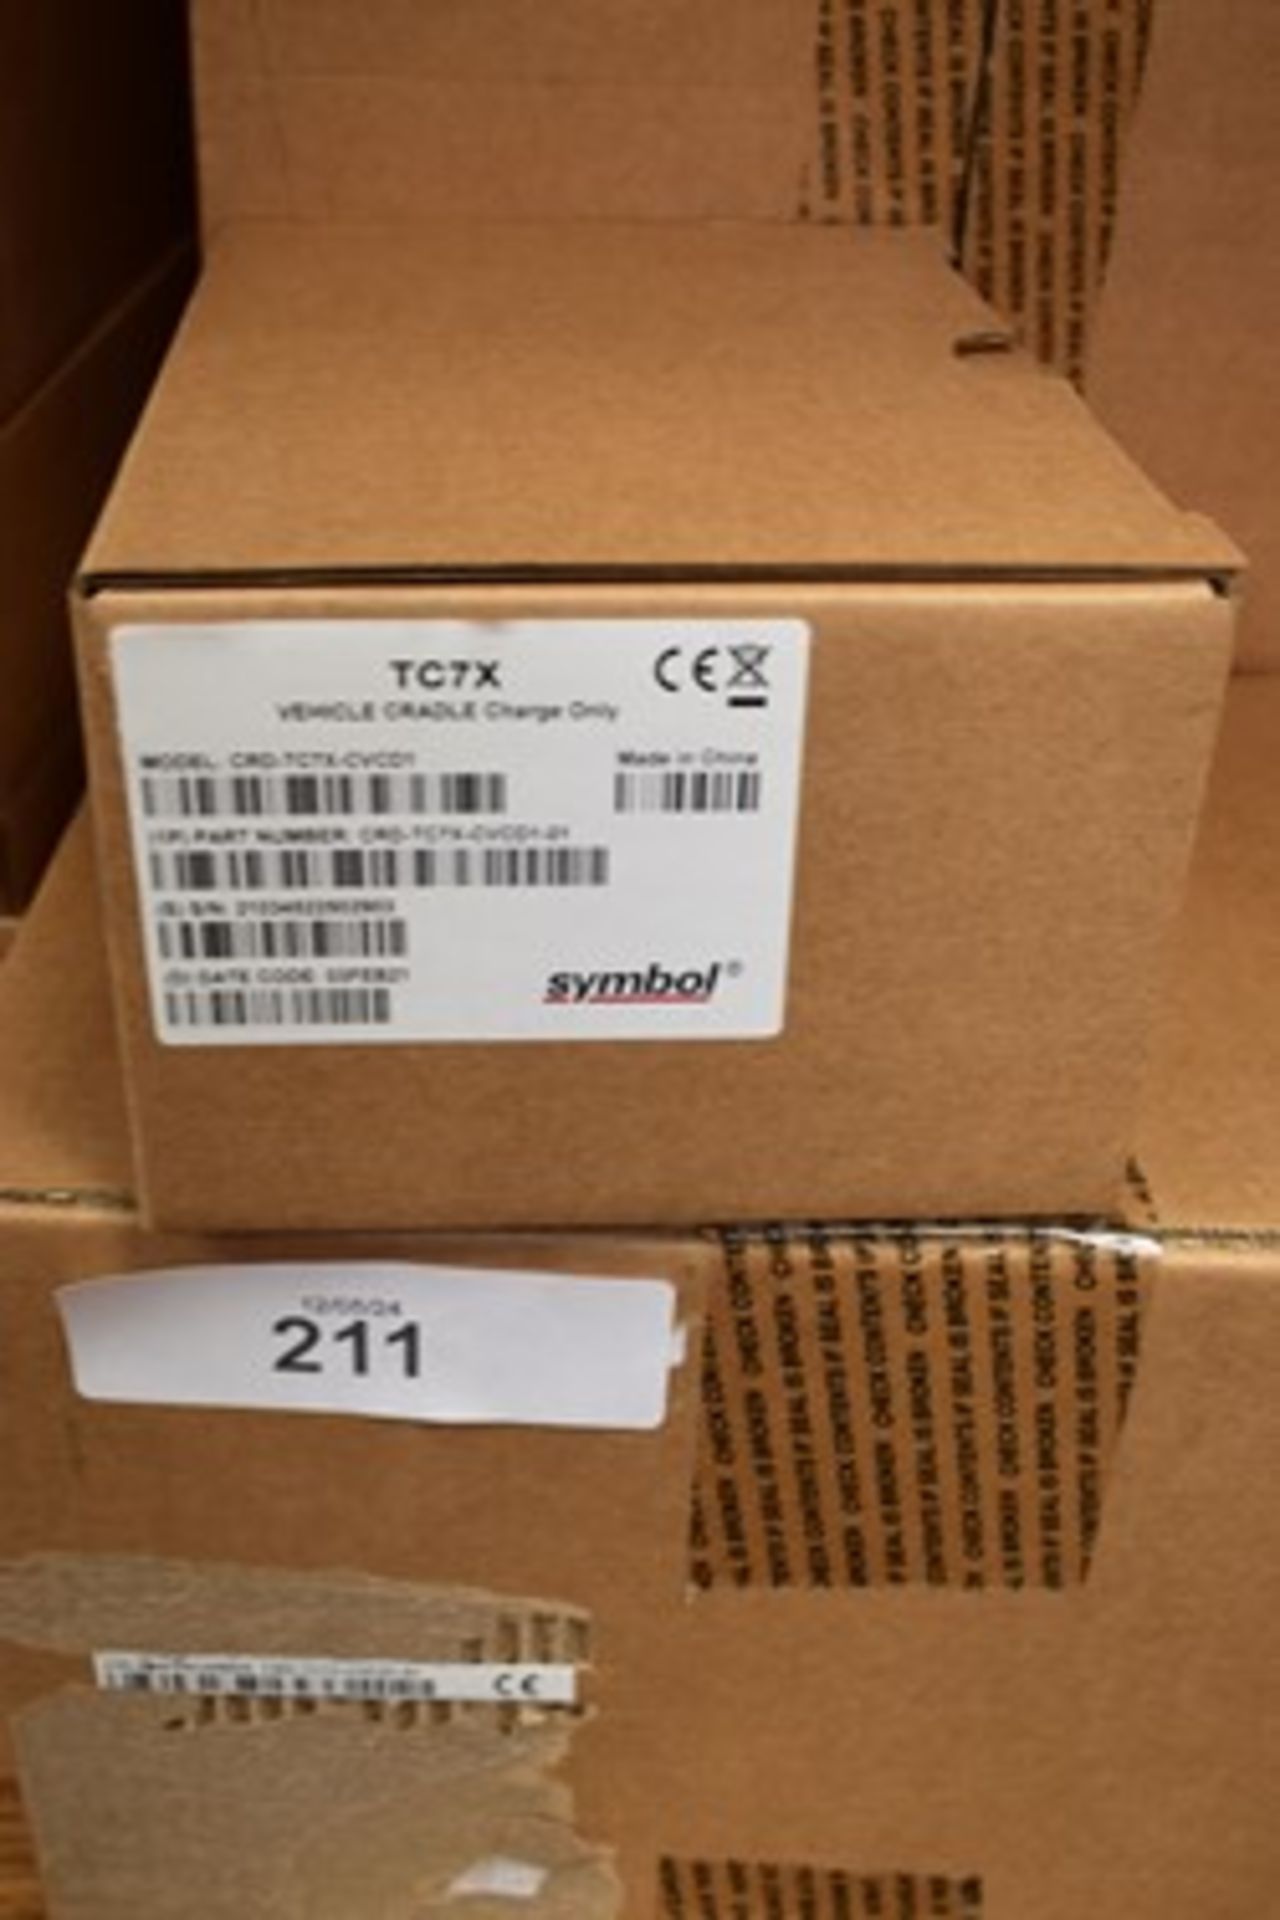 6 x symbol TC7X vehicle cradle charger only, Model TC7X-CVCD1 - new in box (ES17) - Image 2 of 2